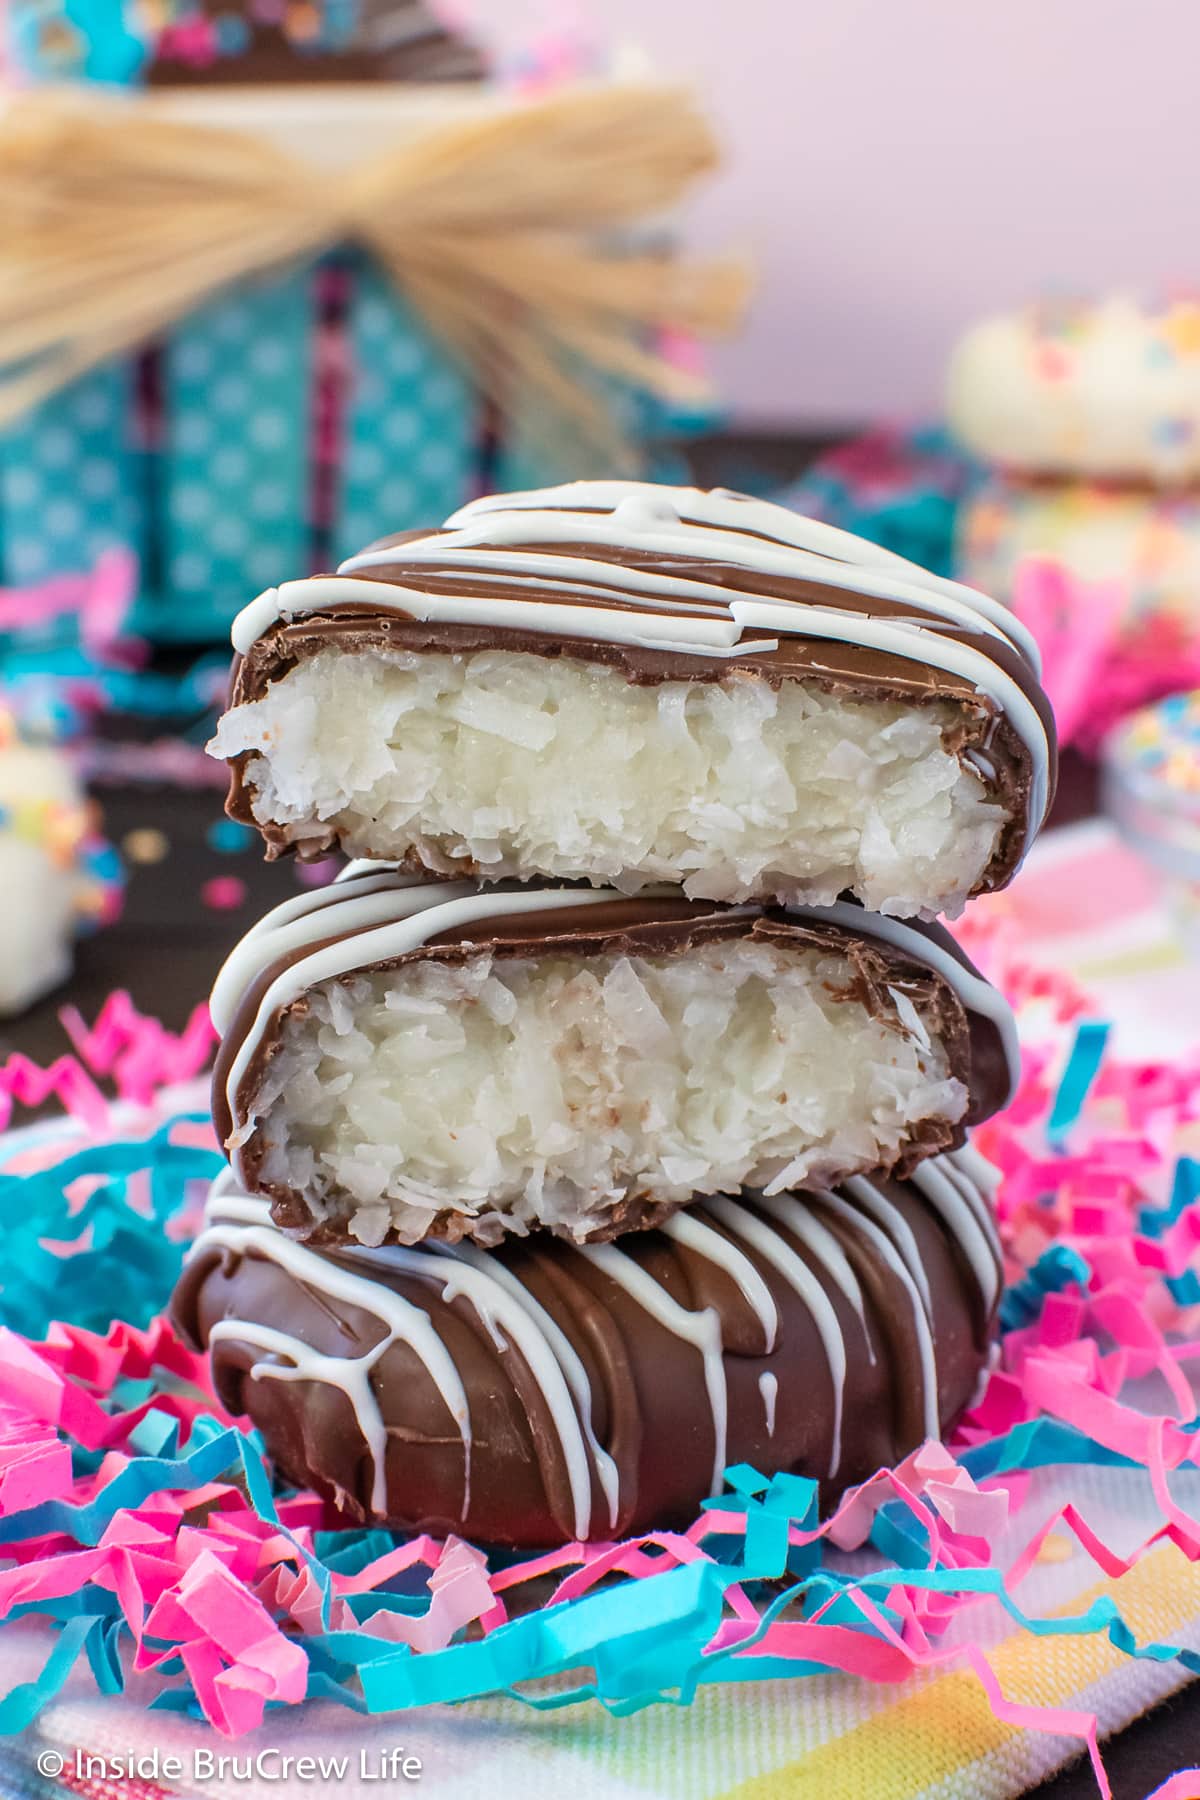 A stack of chocolate covered coconut eggs on a towel.